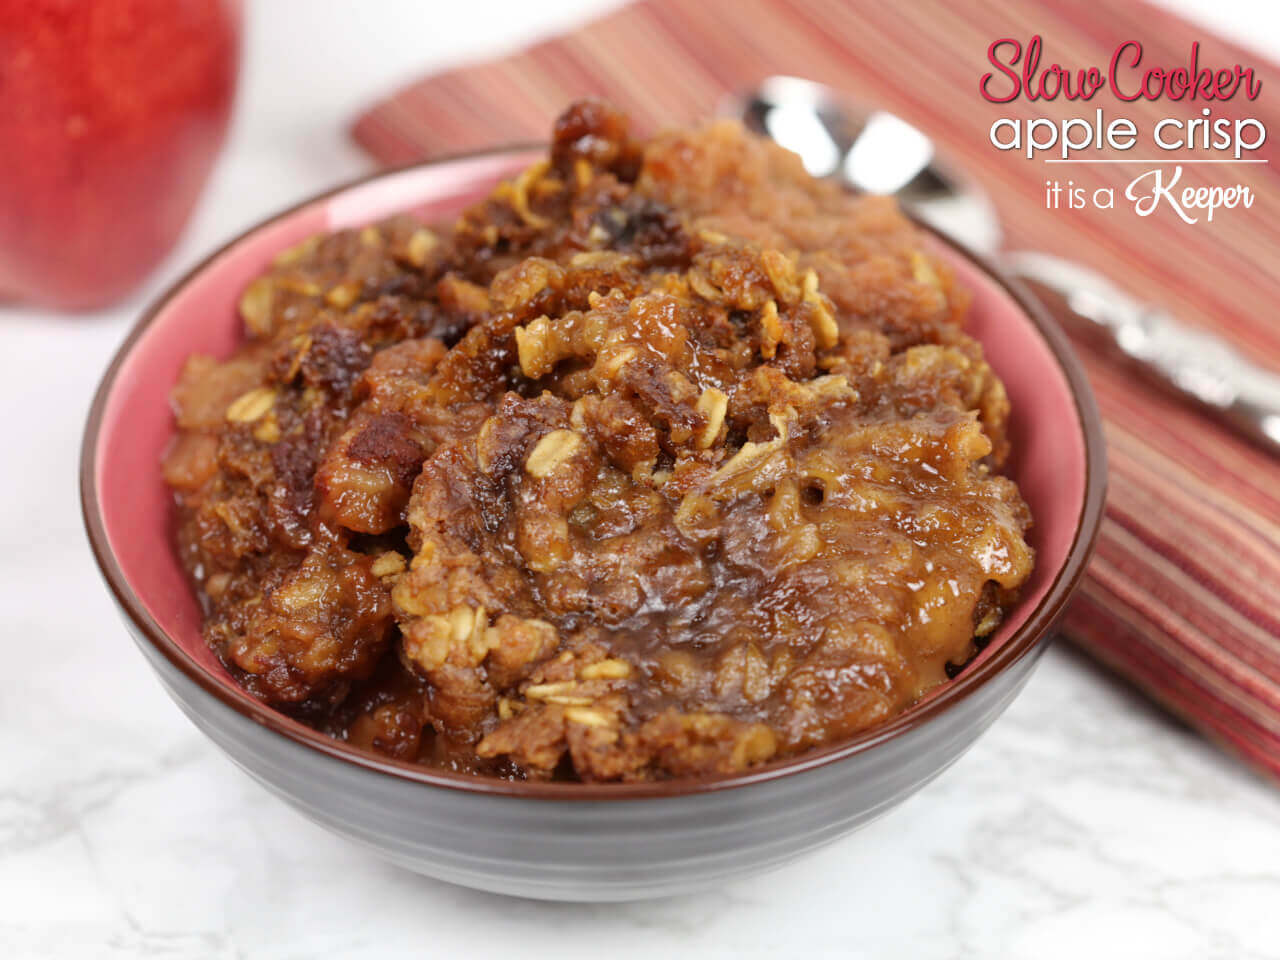 Slow Cooker Apple Crisp in a black bowl with red interior